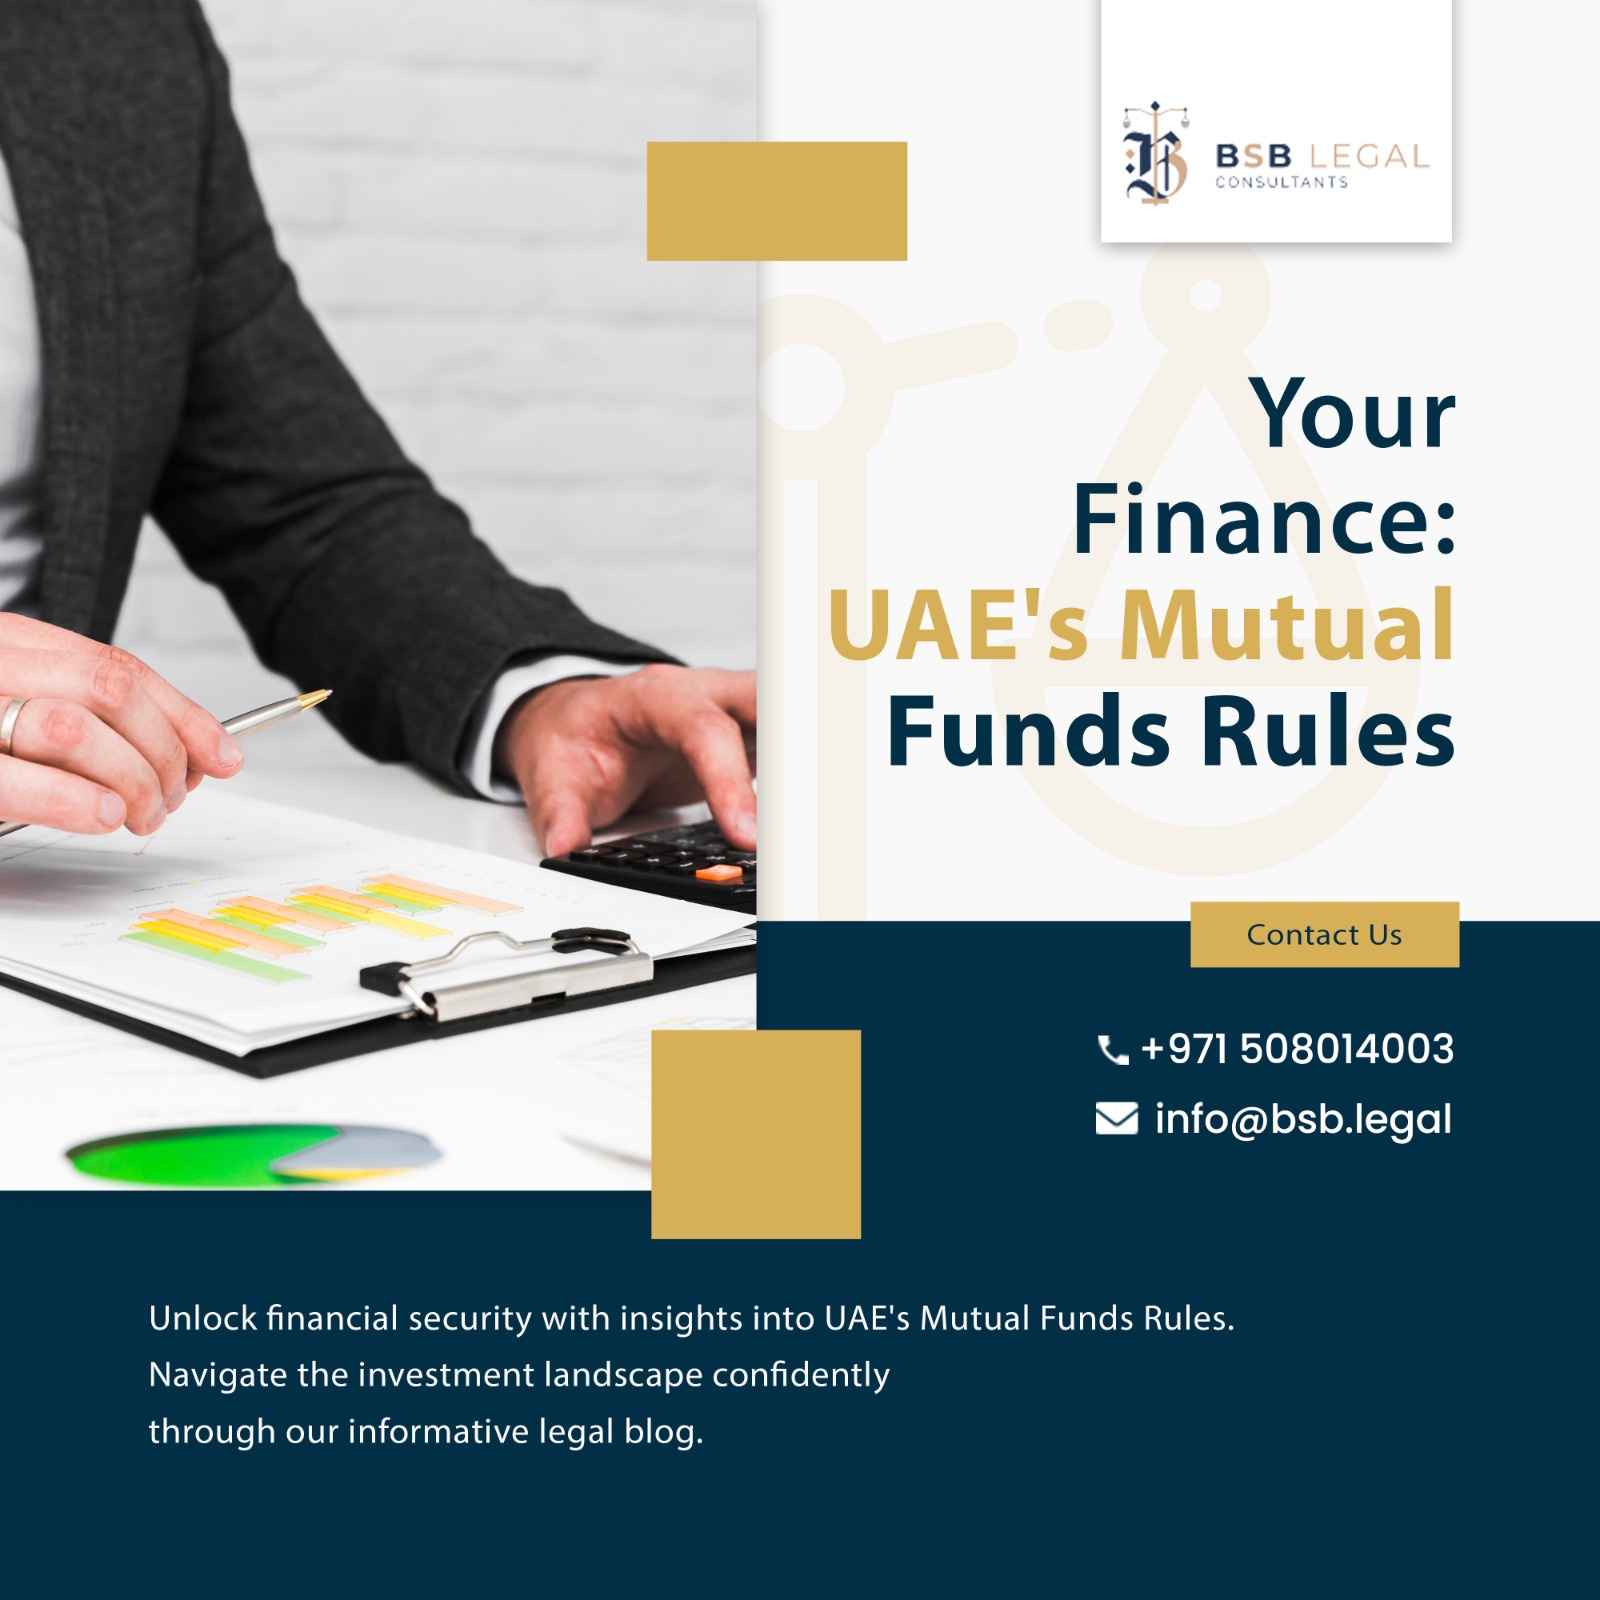 UAE's Mutual Funds Rules